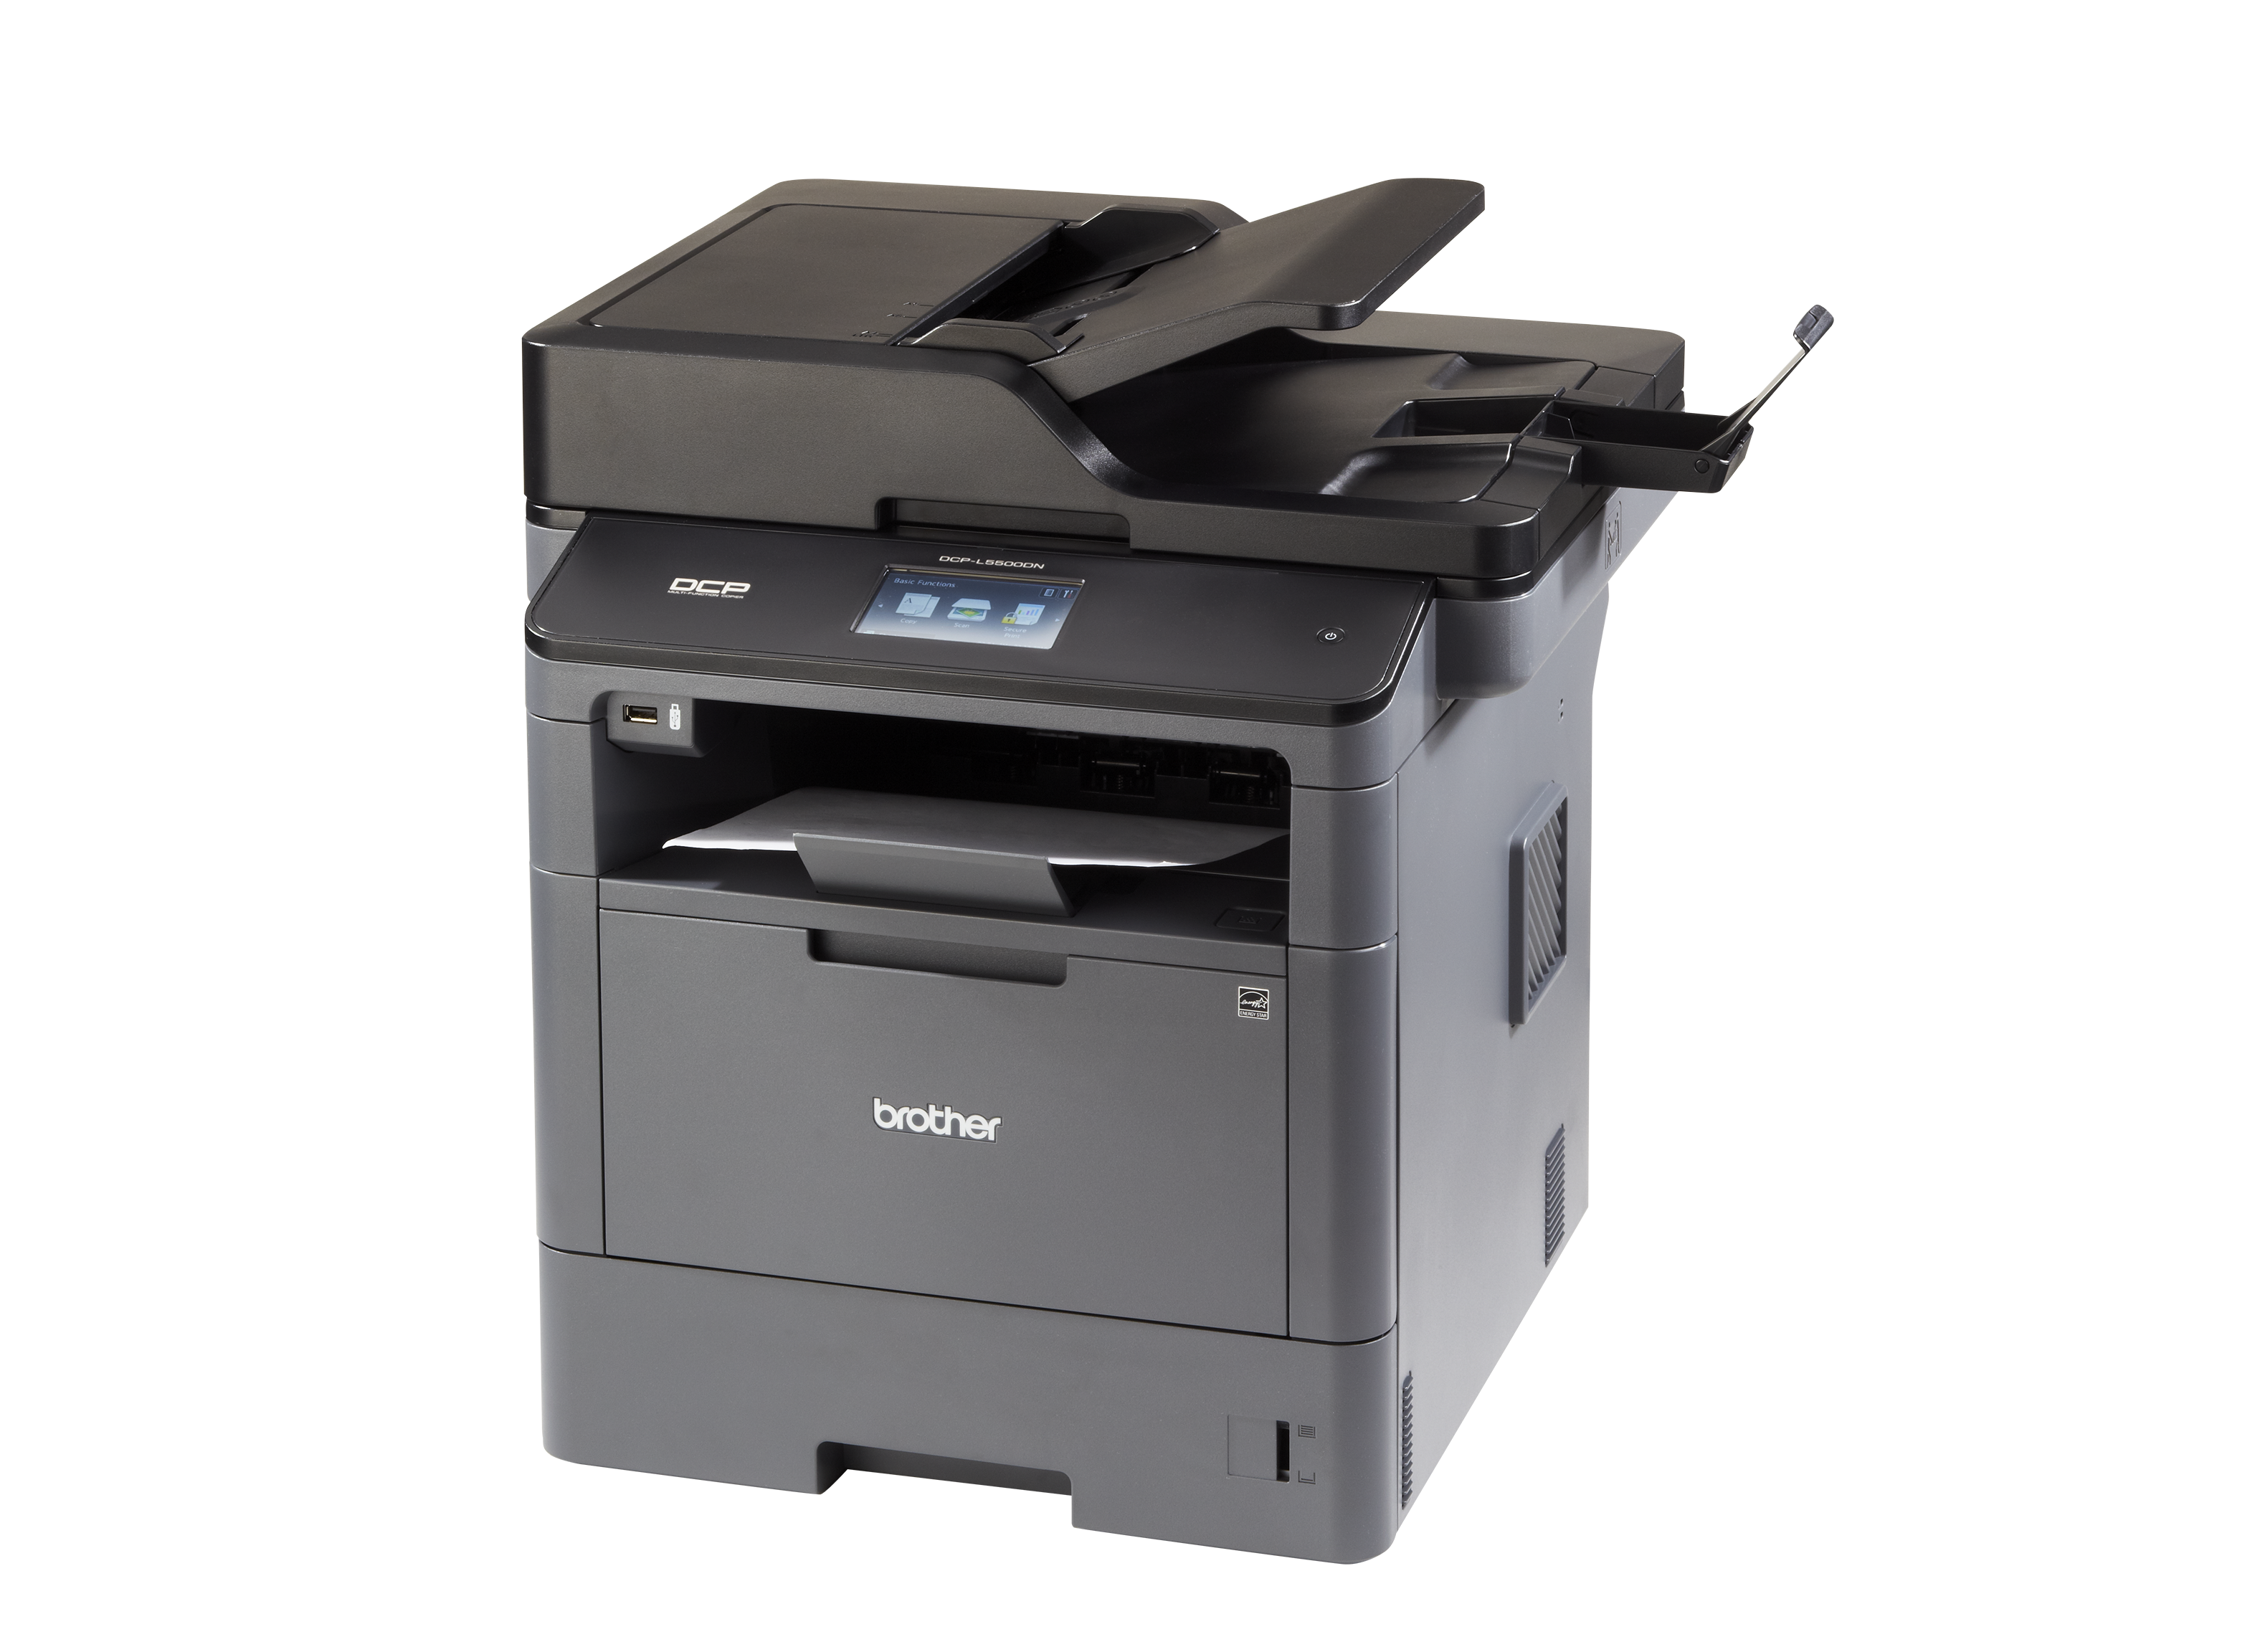 DCP-L5500DN Printer Review - Consumer Reports